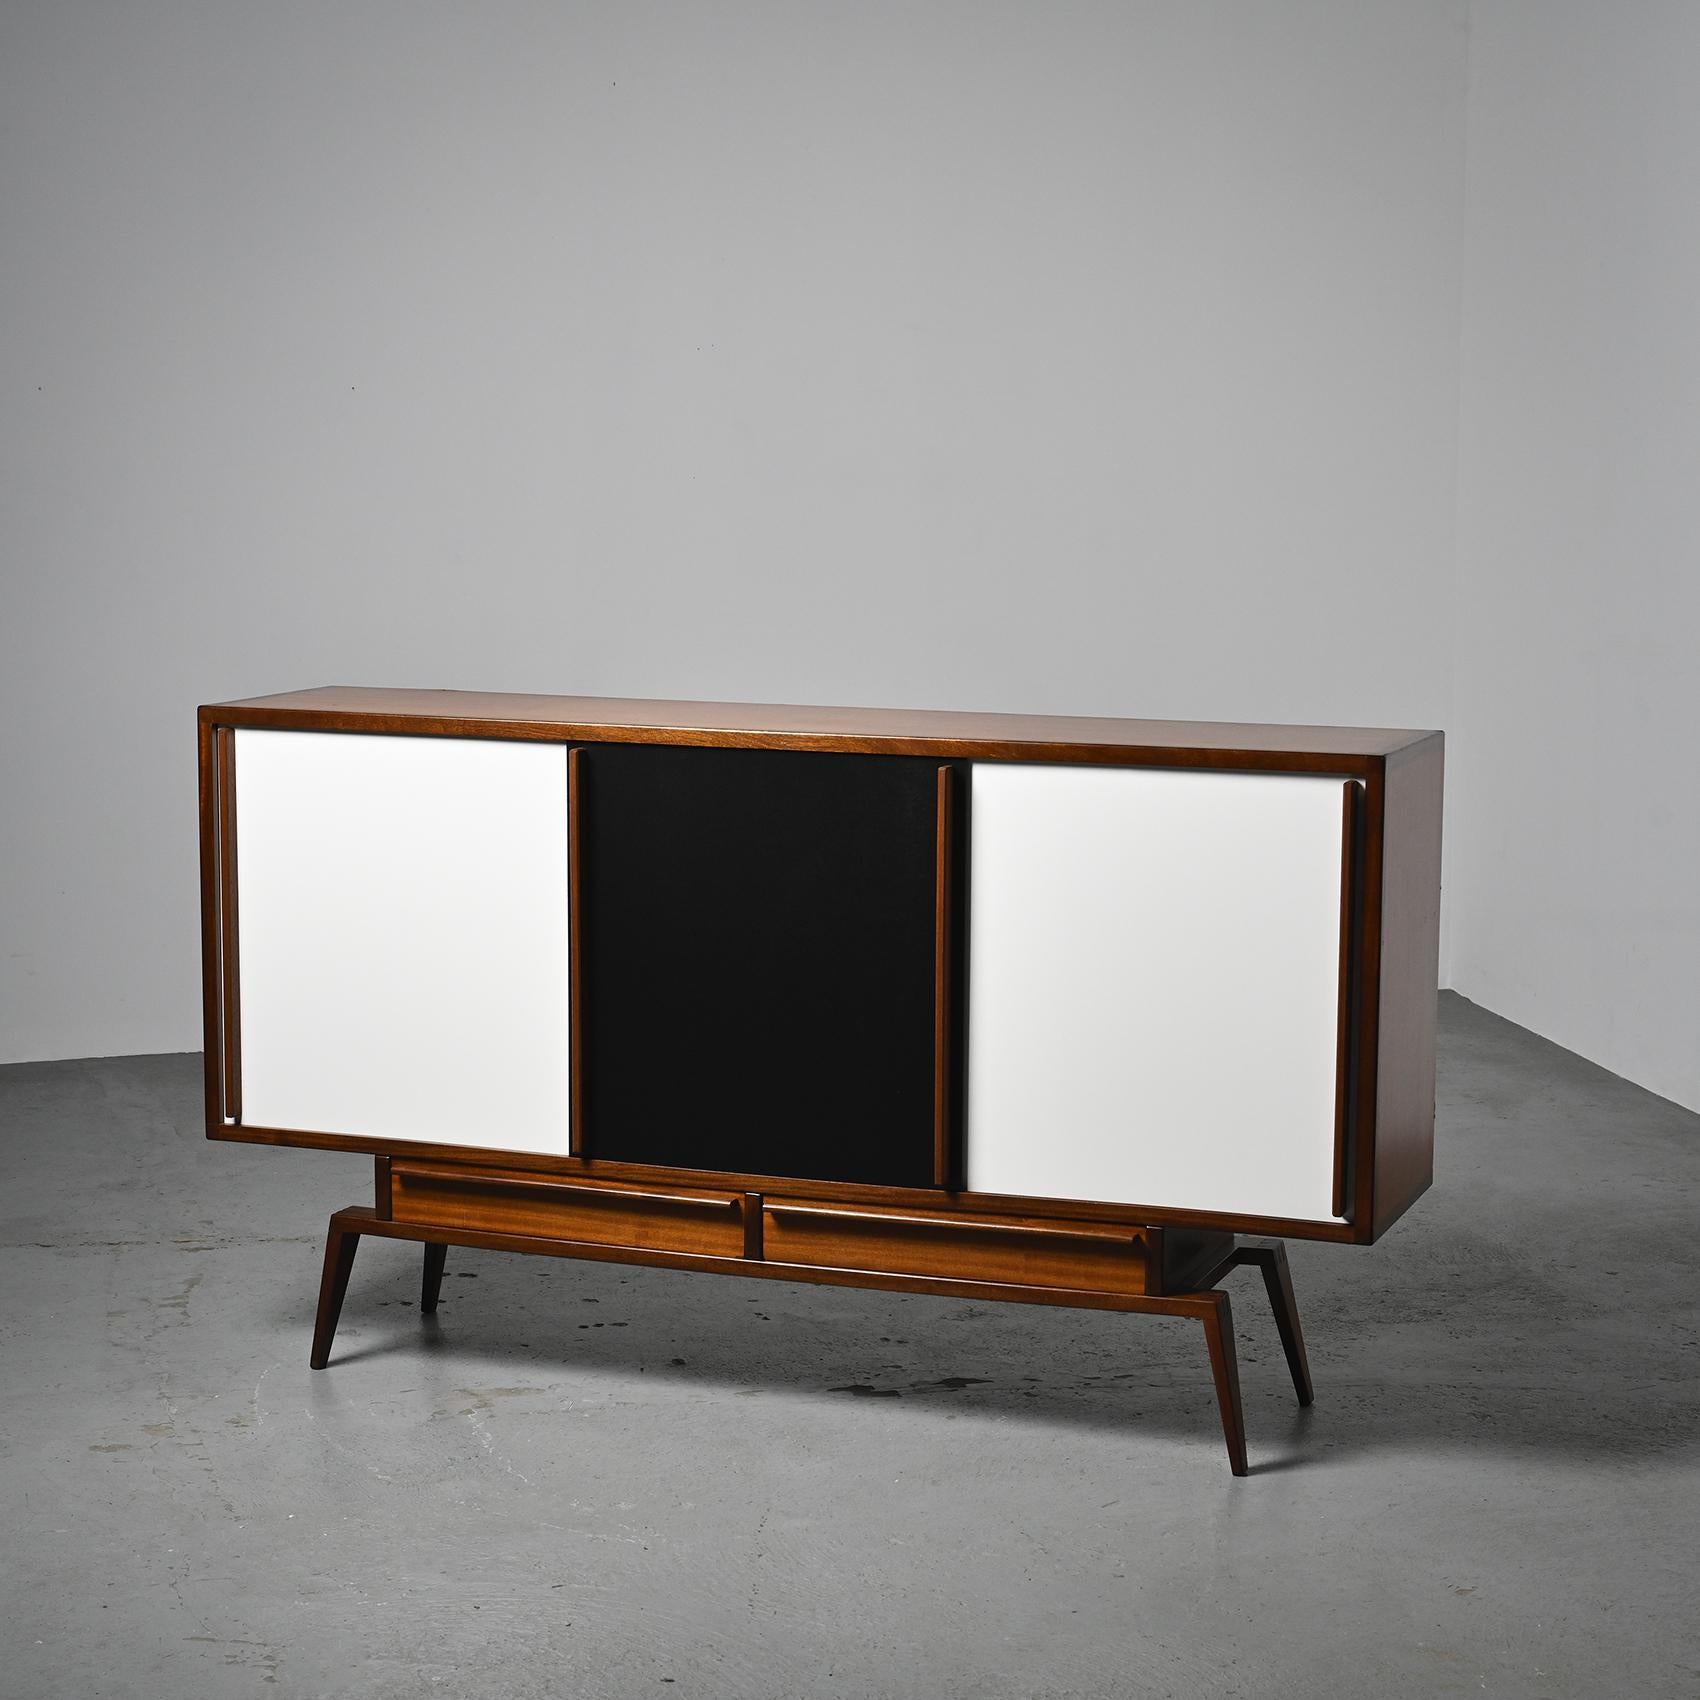 A sideboard designed by André Sornay, the inventor of the 